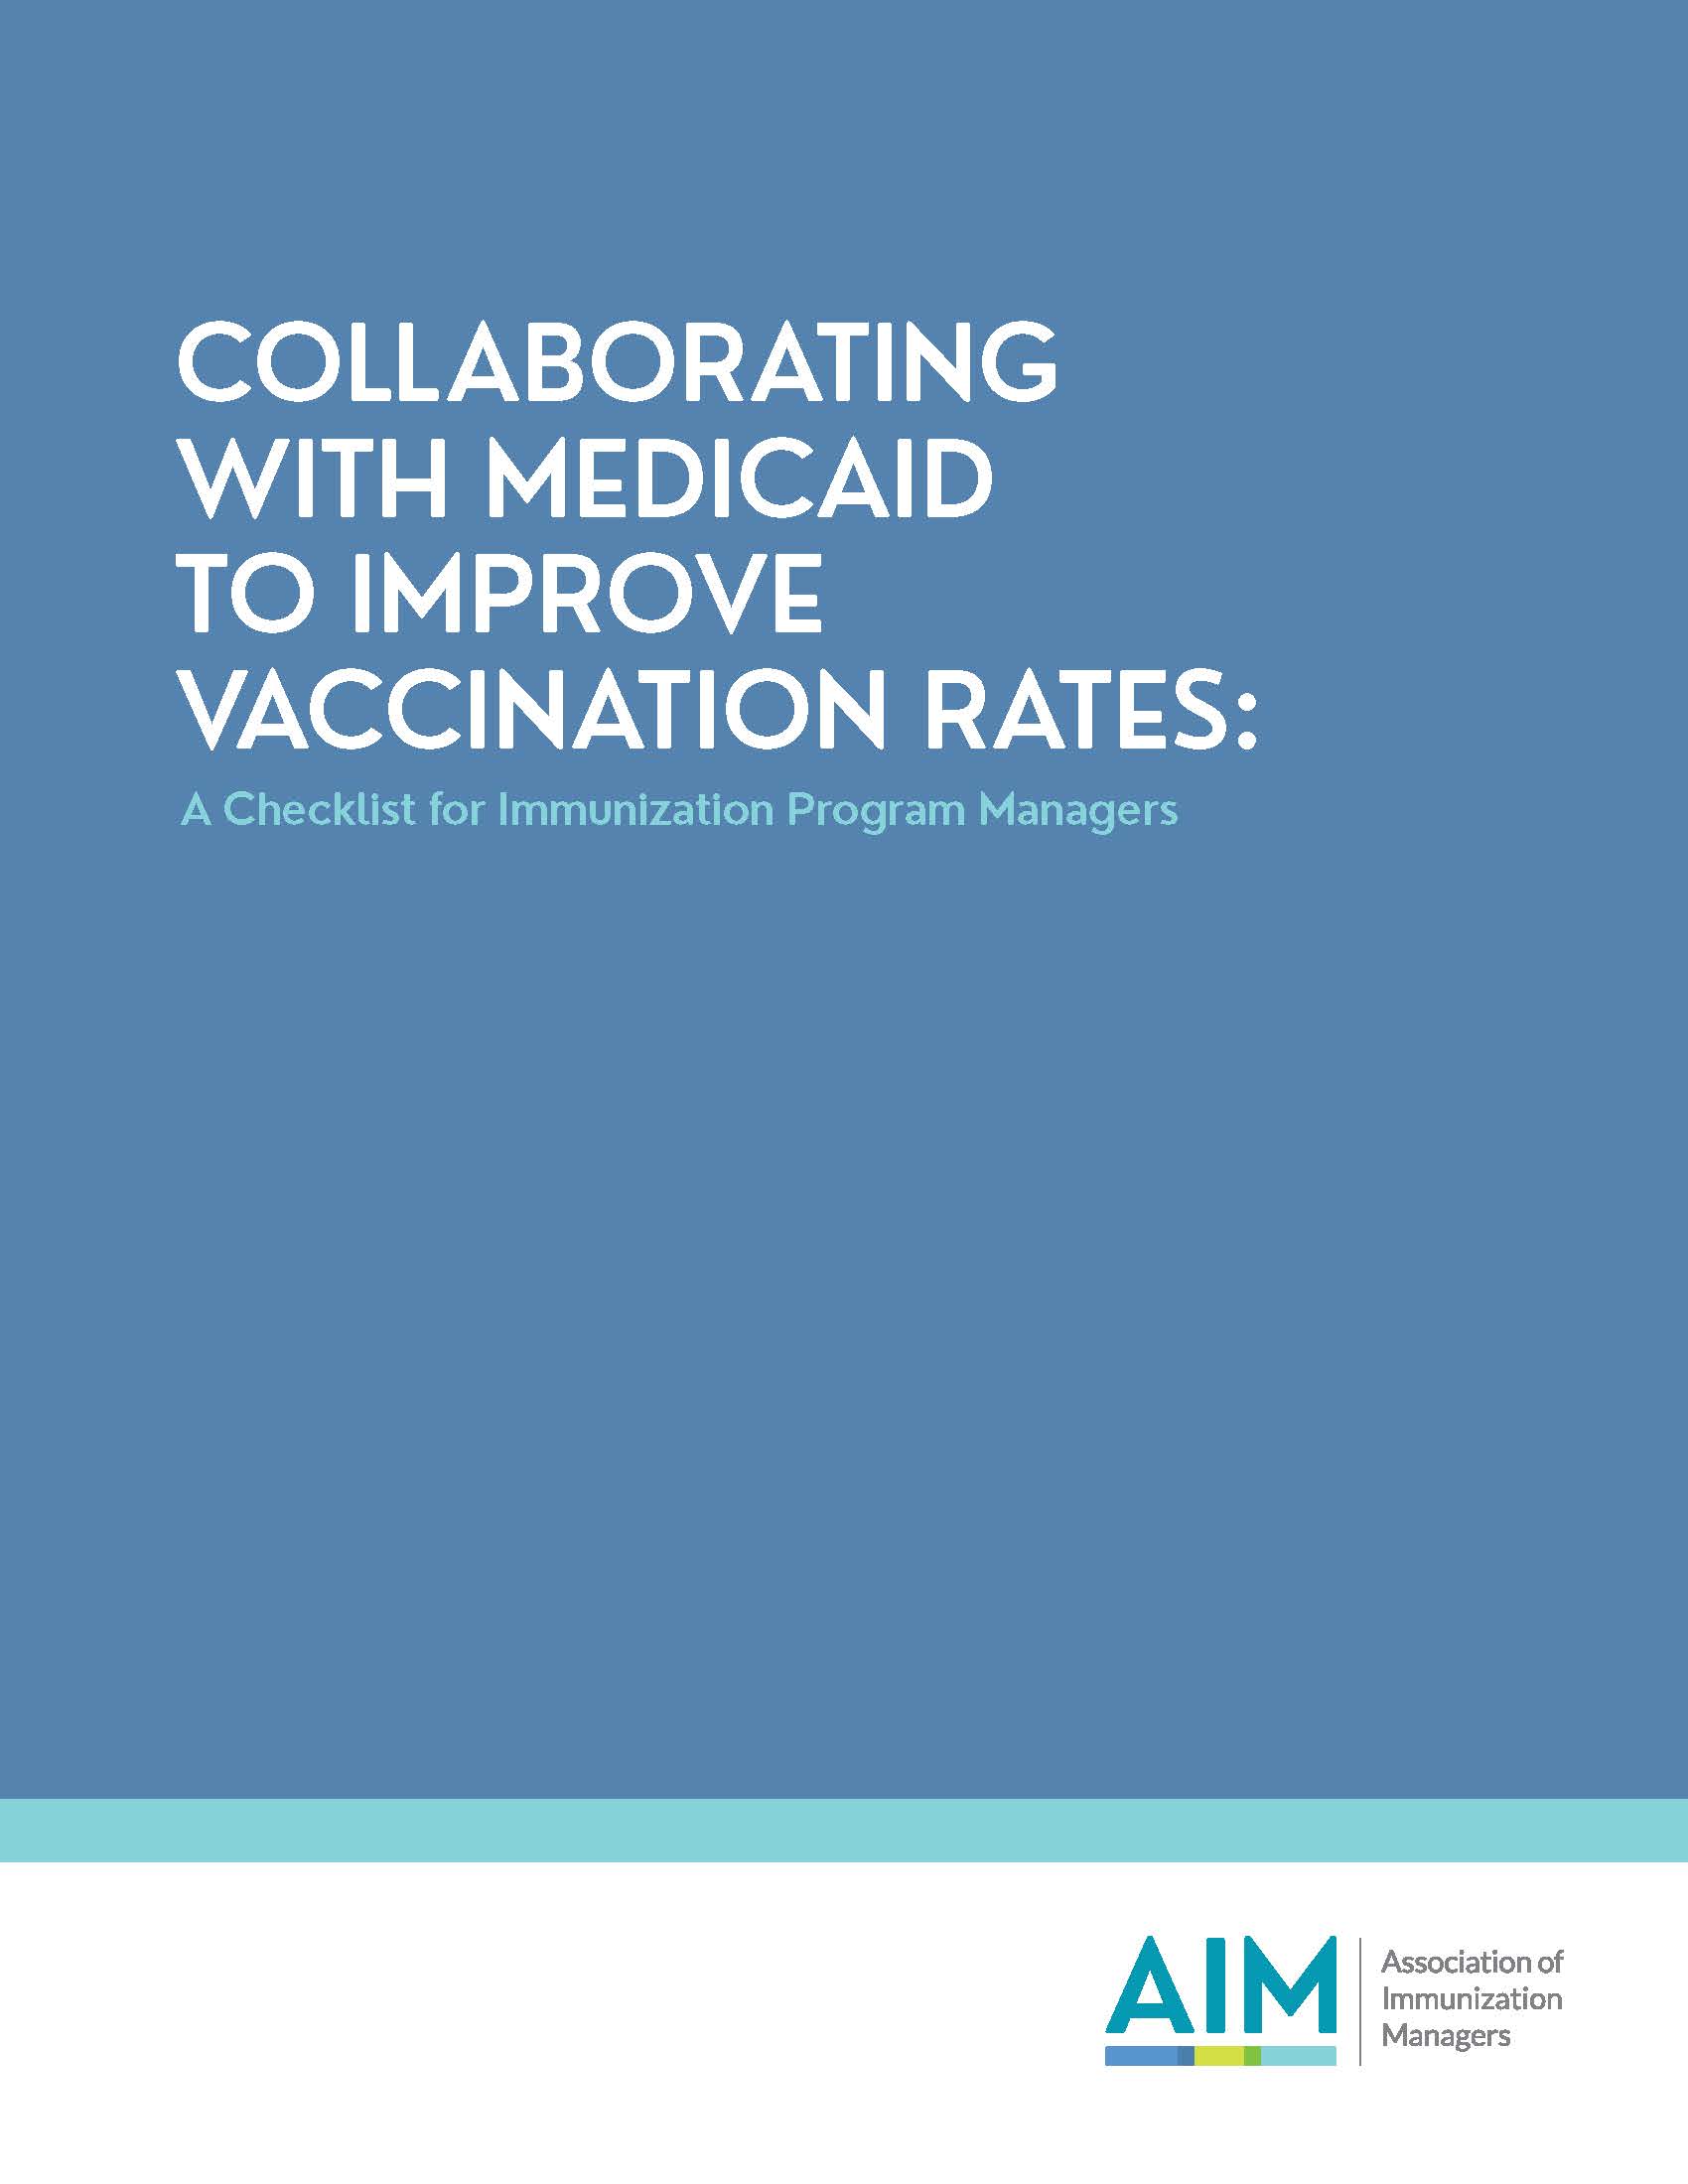 Collaborating with Medicaid to improve vaccination rates, a checklist for immunization program managers